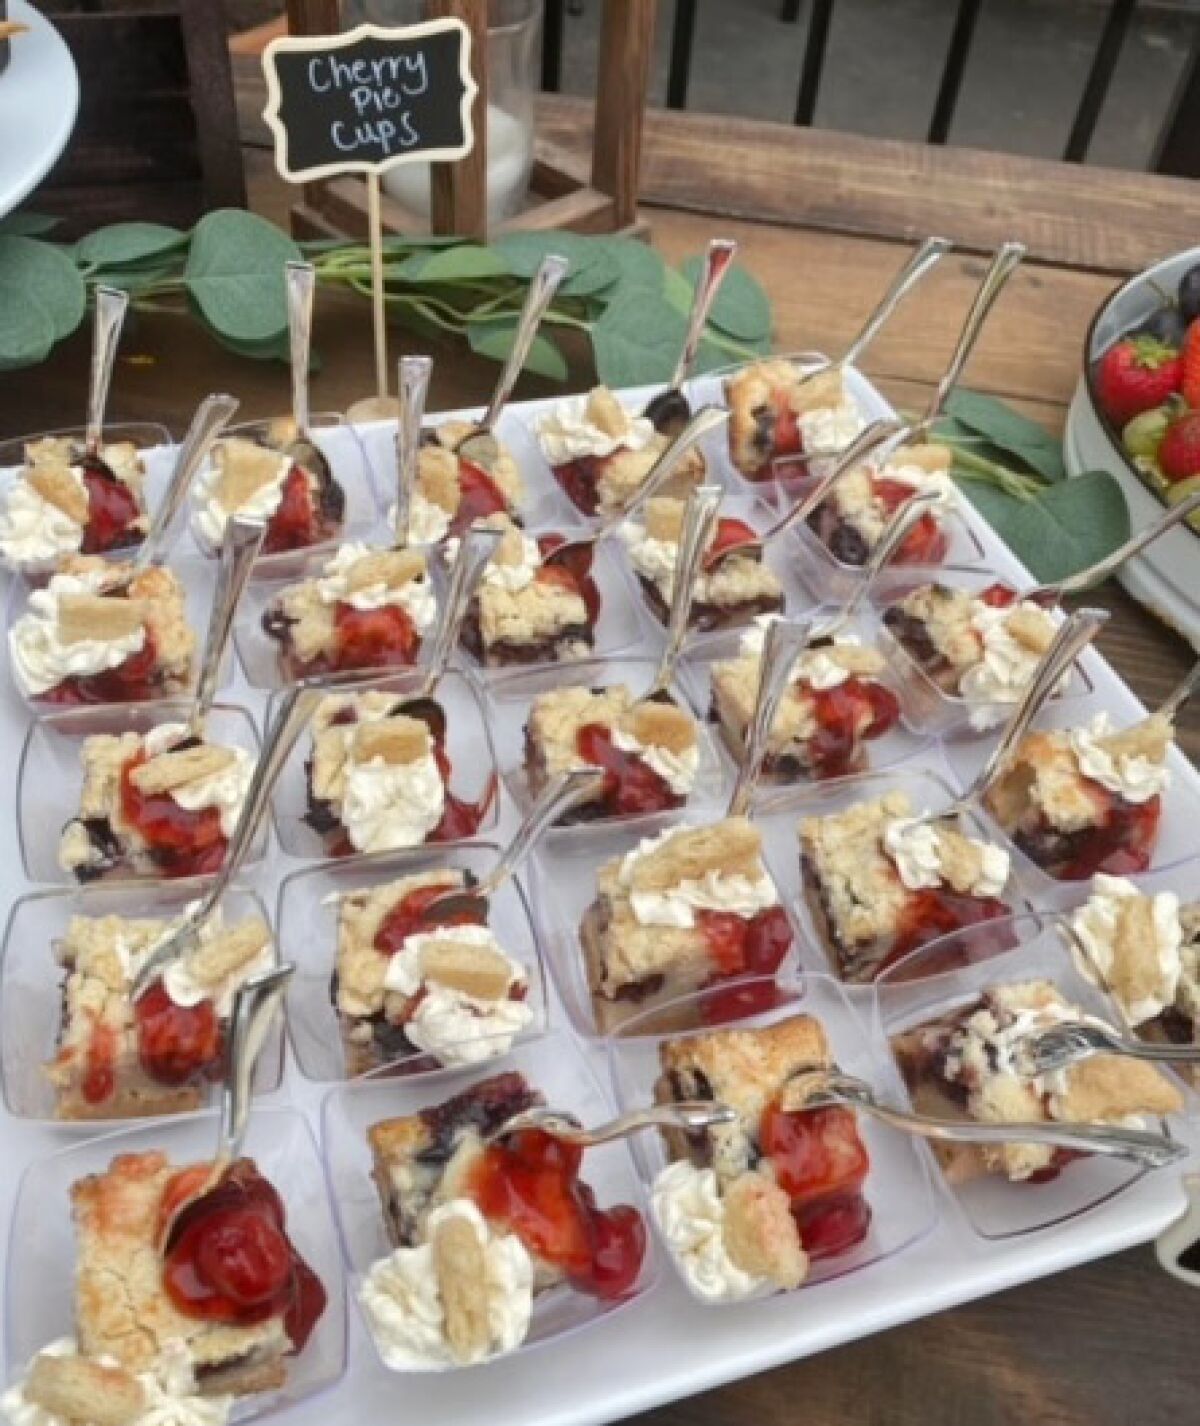 Alexis' Cakery made cherry pie cups and brownie bites for the Rustic Interiors Grand Opening on Oct. 14 in Ramona.